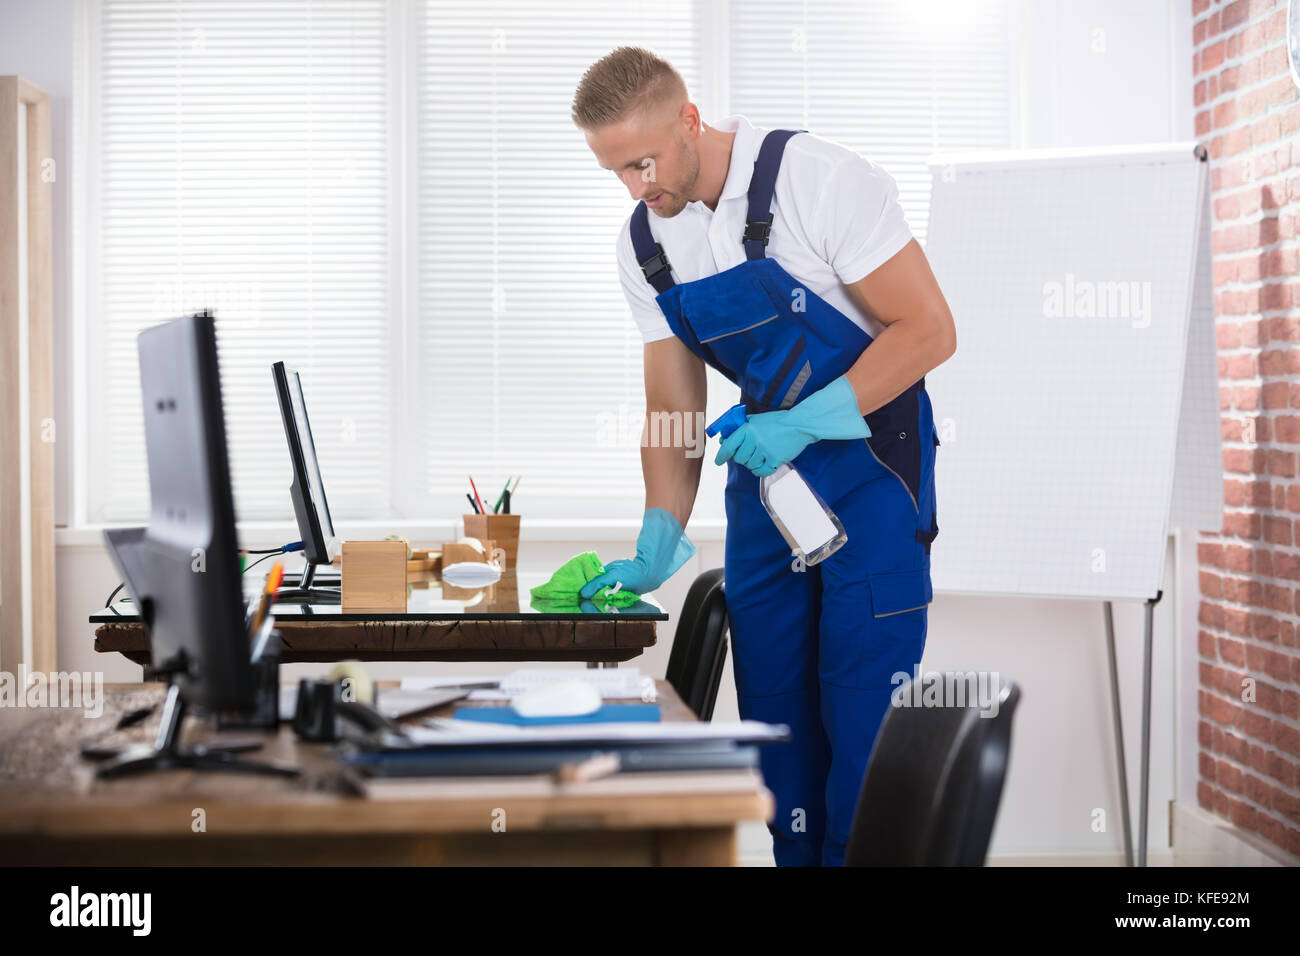 Portrait Of A Smiling Male Janitor Cleaning Desk With Cloth At Workplace Stock Photo